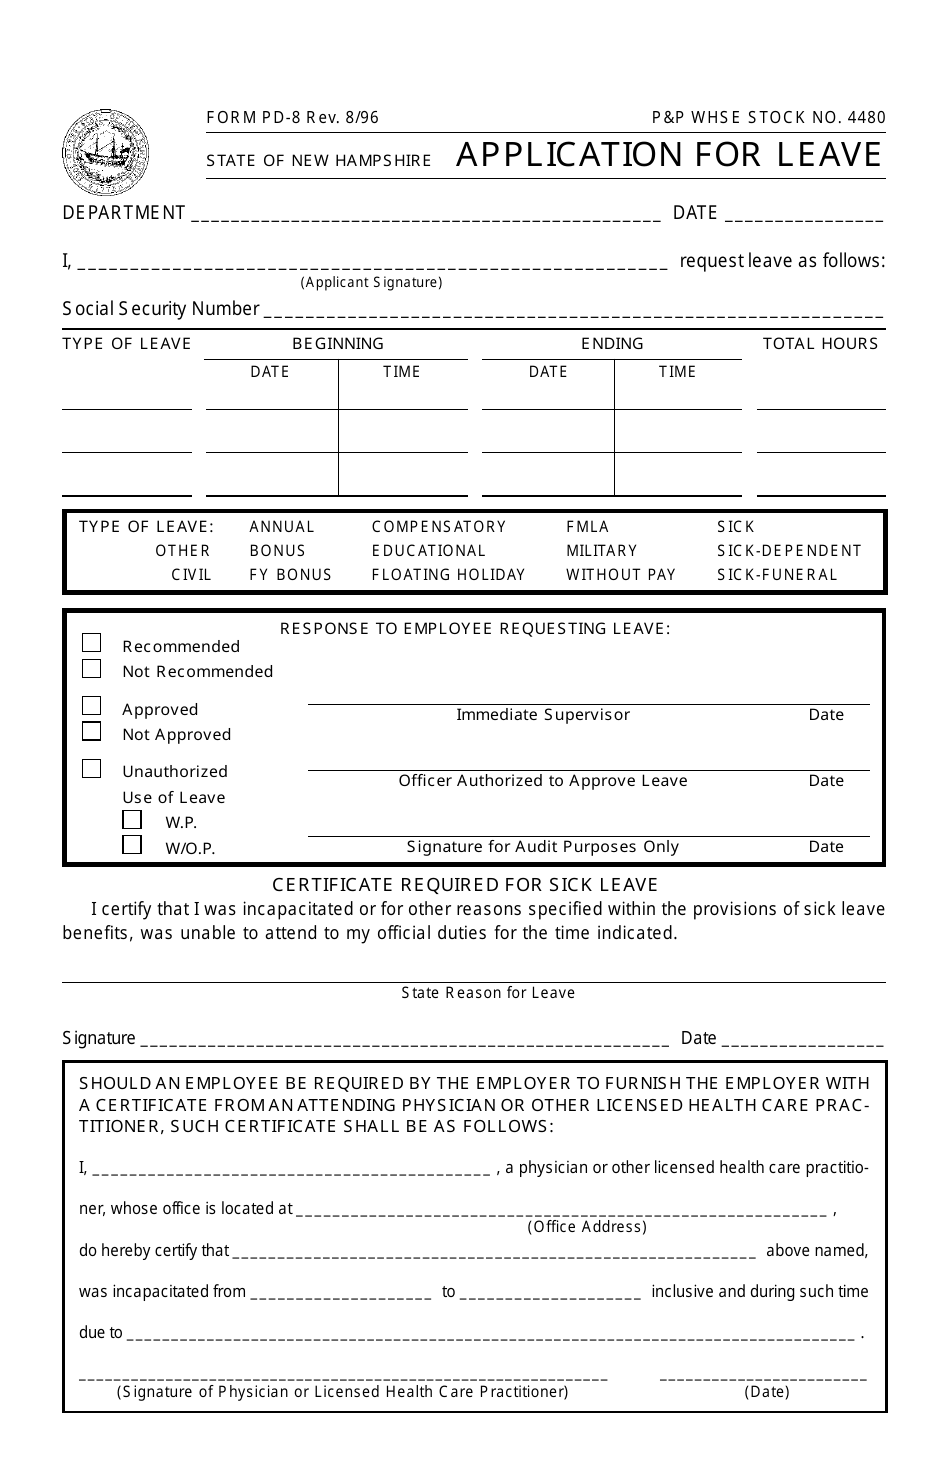 Form PD-8 Application for Leave - New Hampshire, Page 1